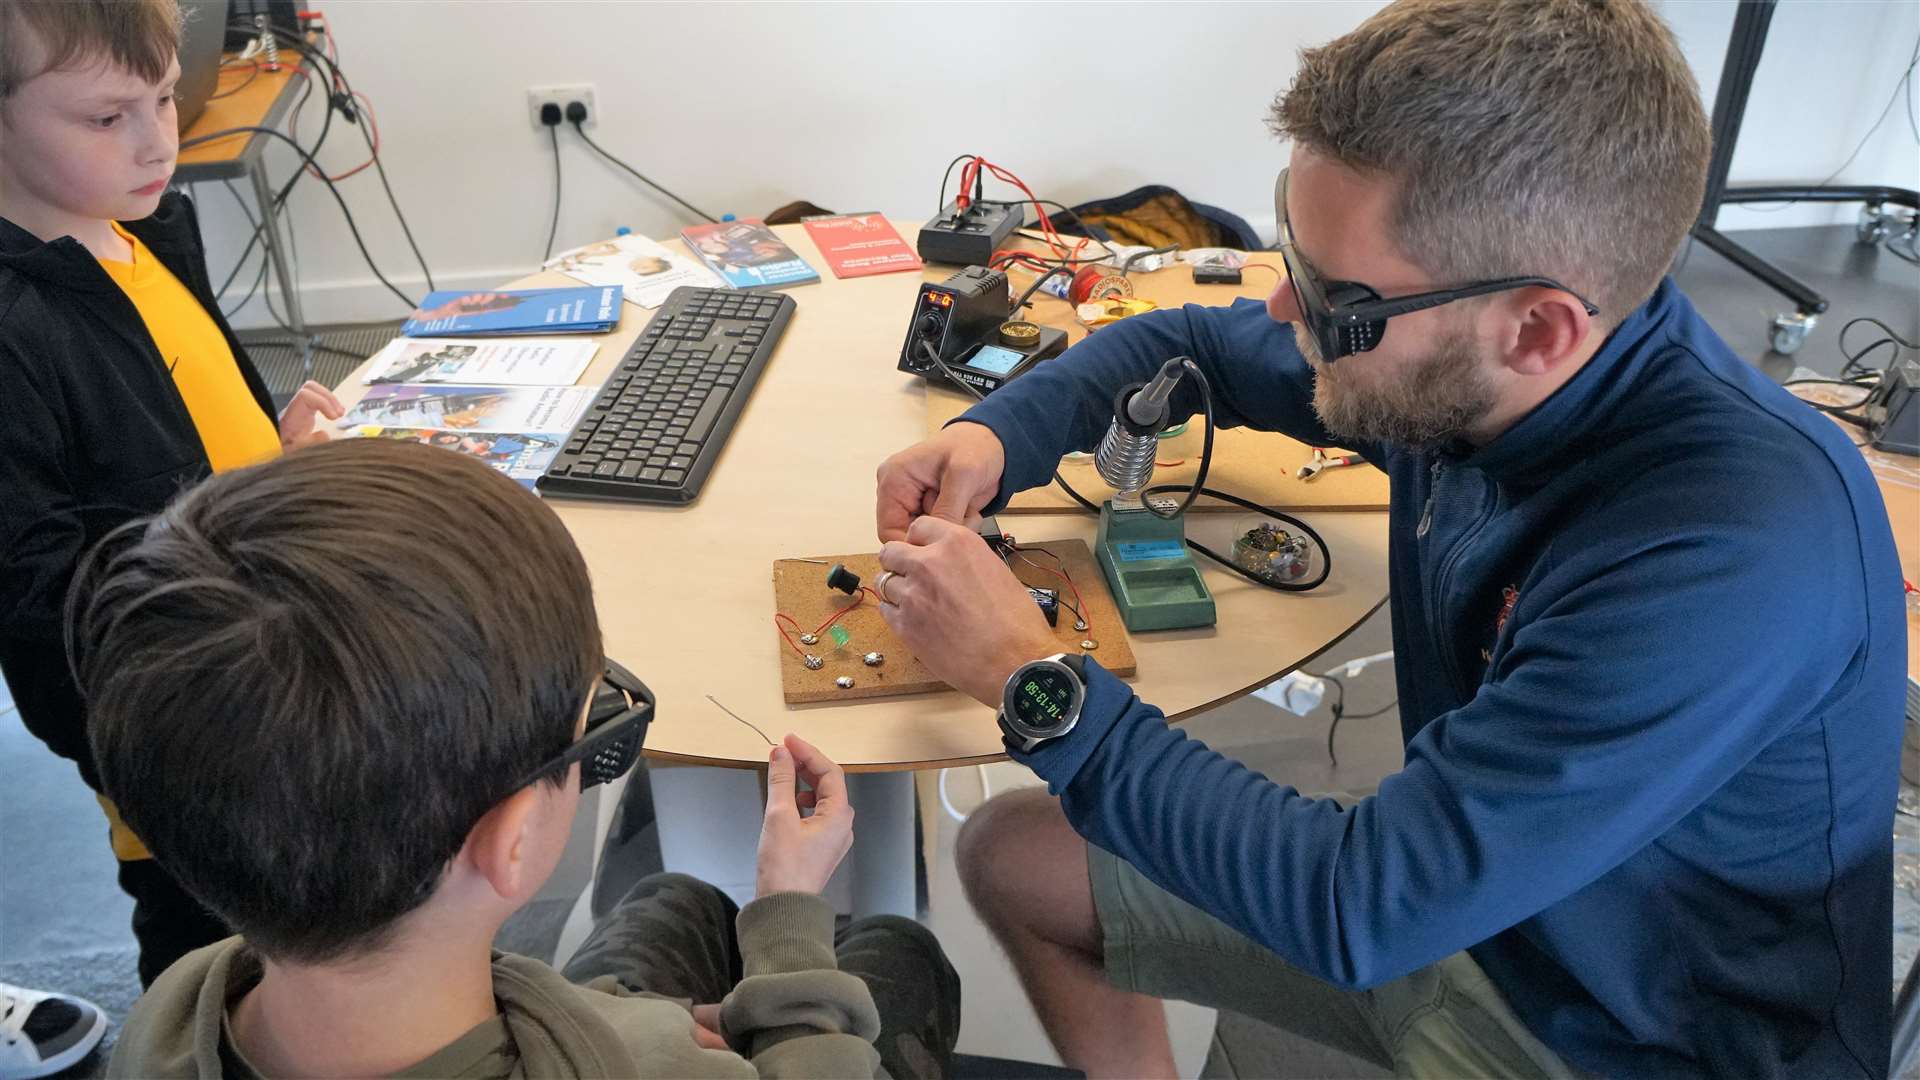 Science teacher Chris Aitken shows kids how to solder as part of the Caithness Amateur Radio Society stand. The children learned how to make a simple electrical circuit to turn on an LED light. Picture: DGS